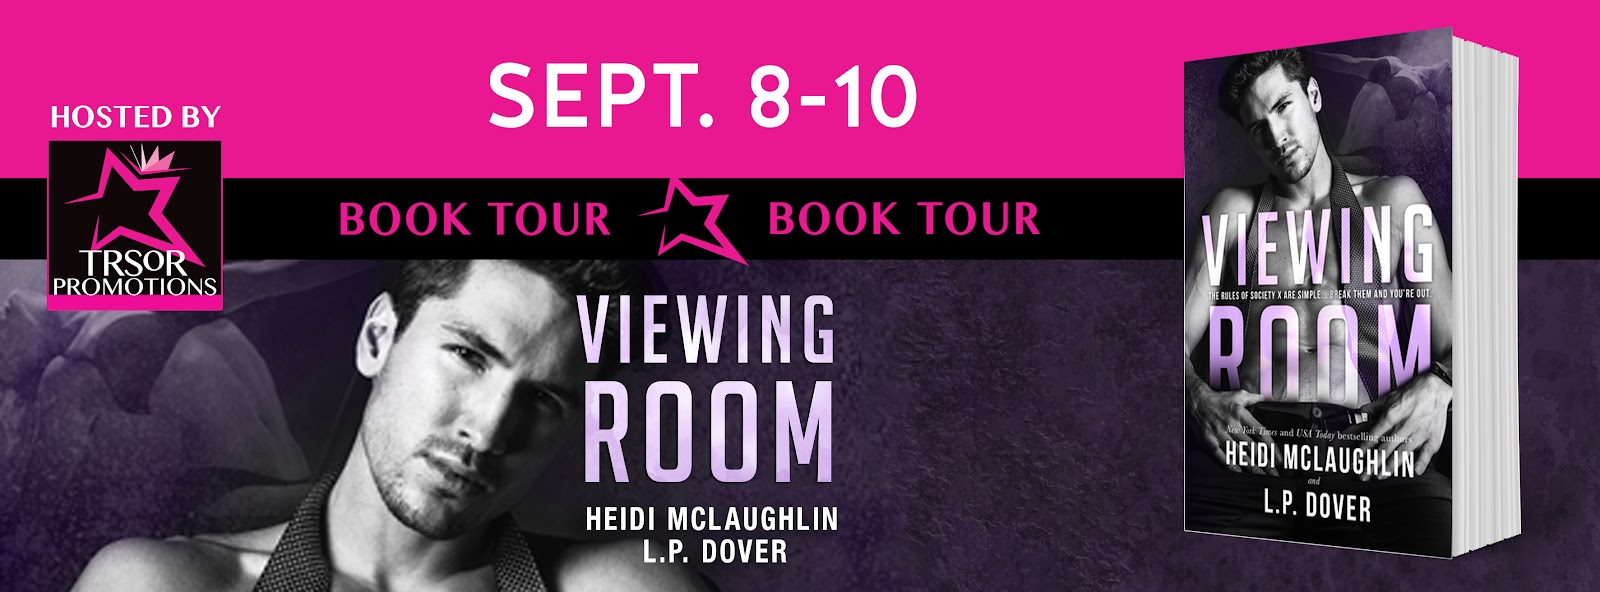 VIEWING_ROOM_BOOK_TOUR.jpg